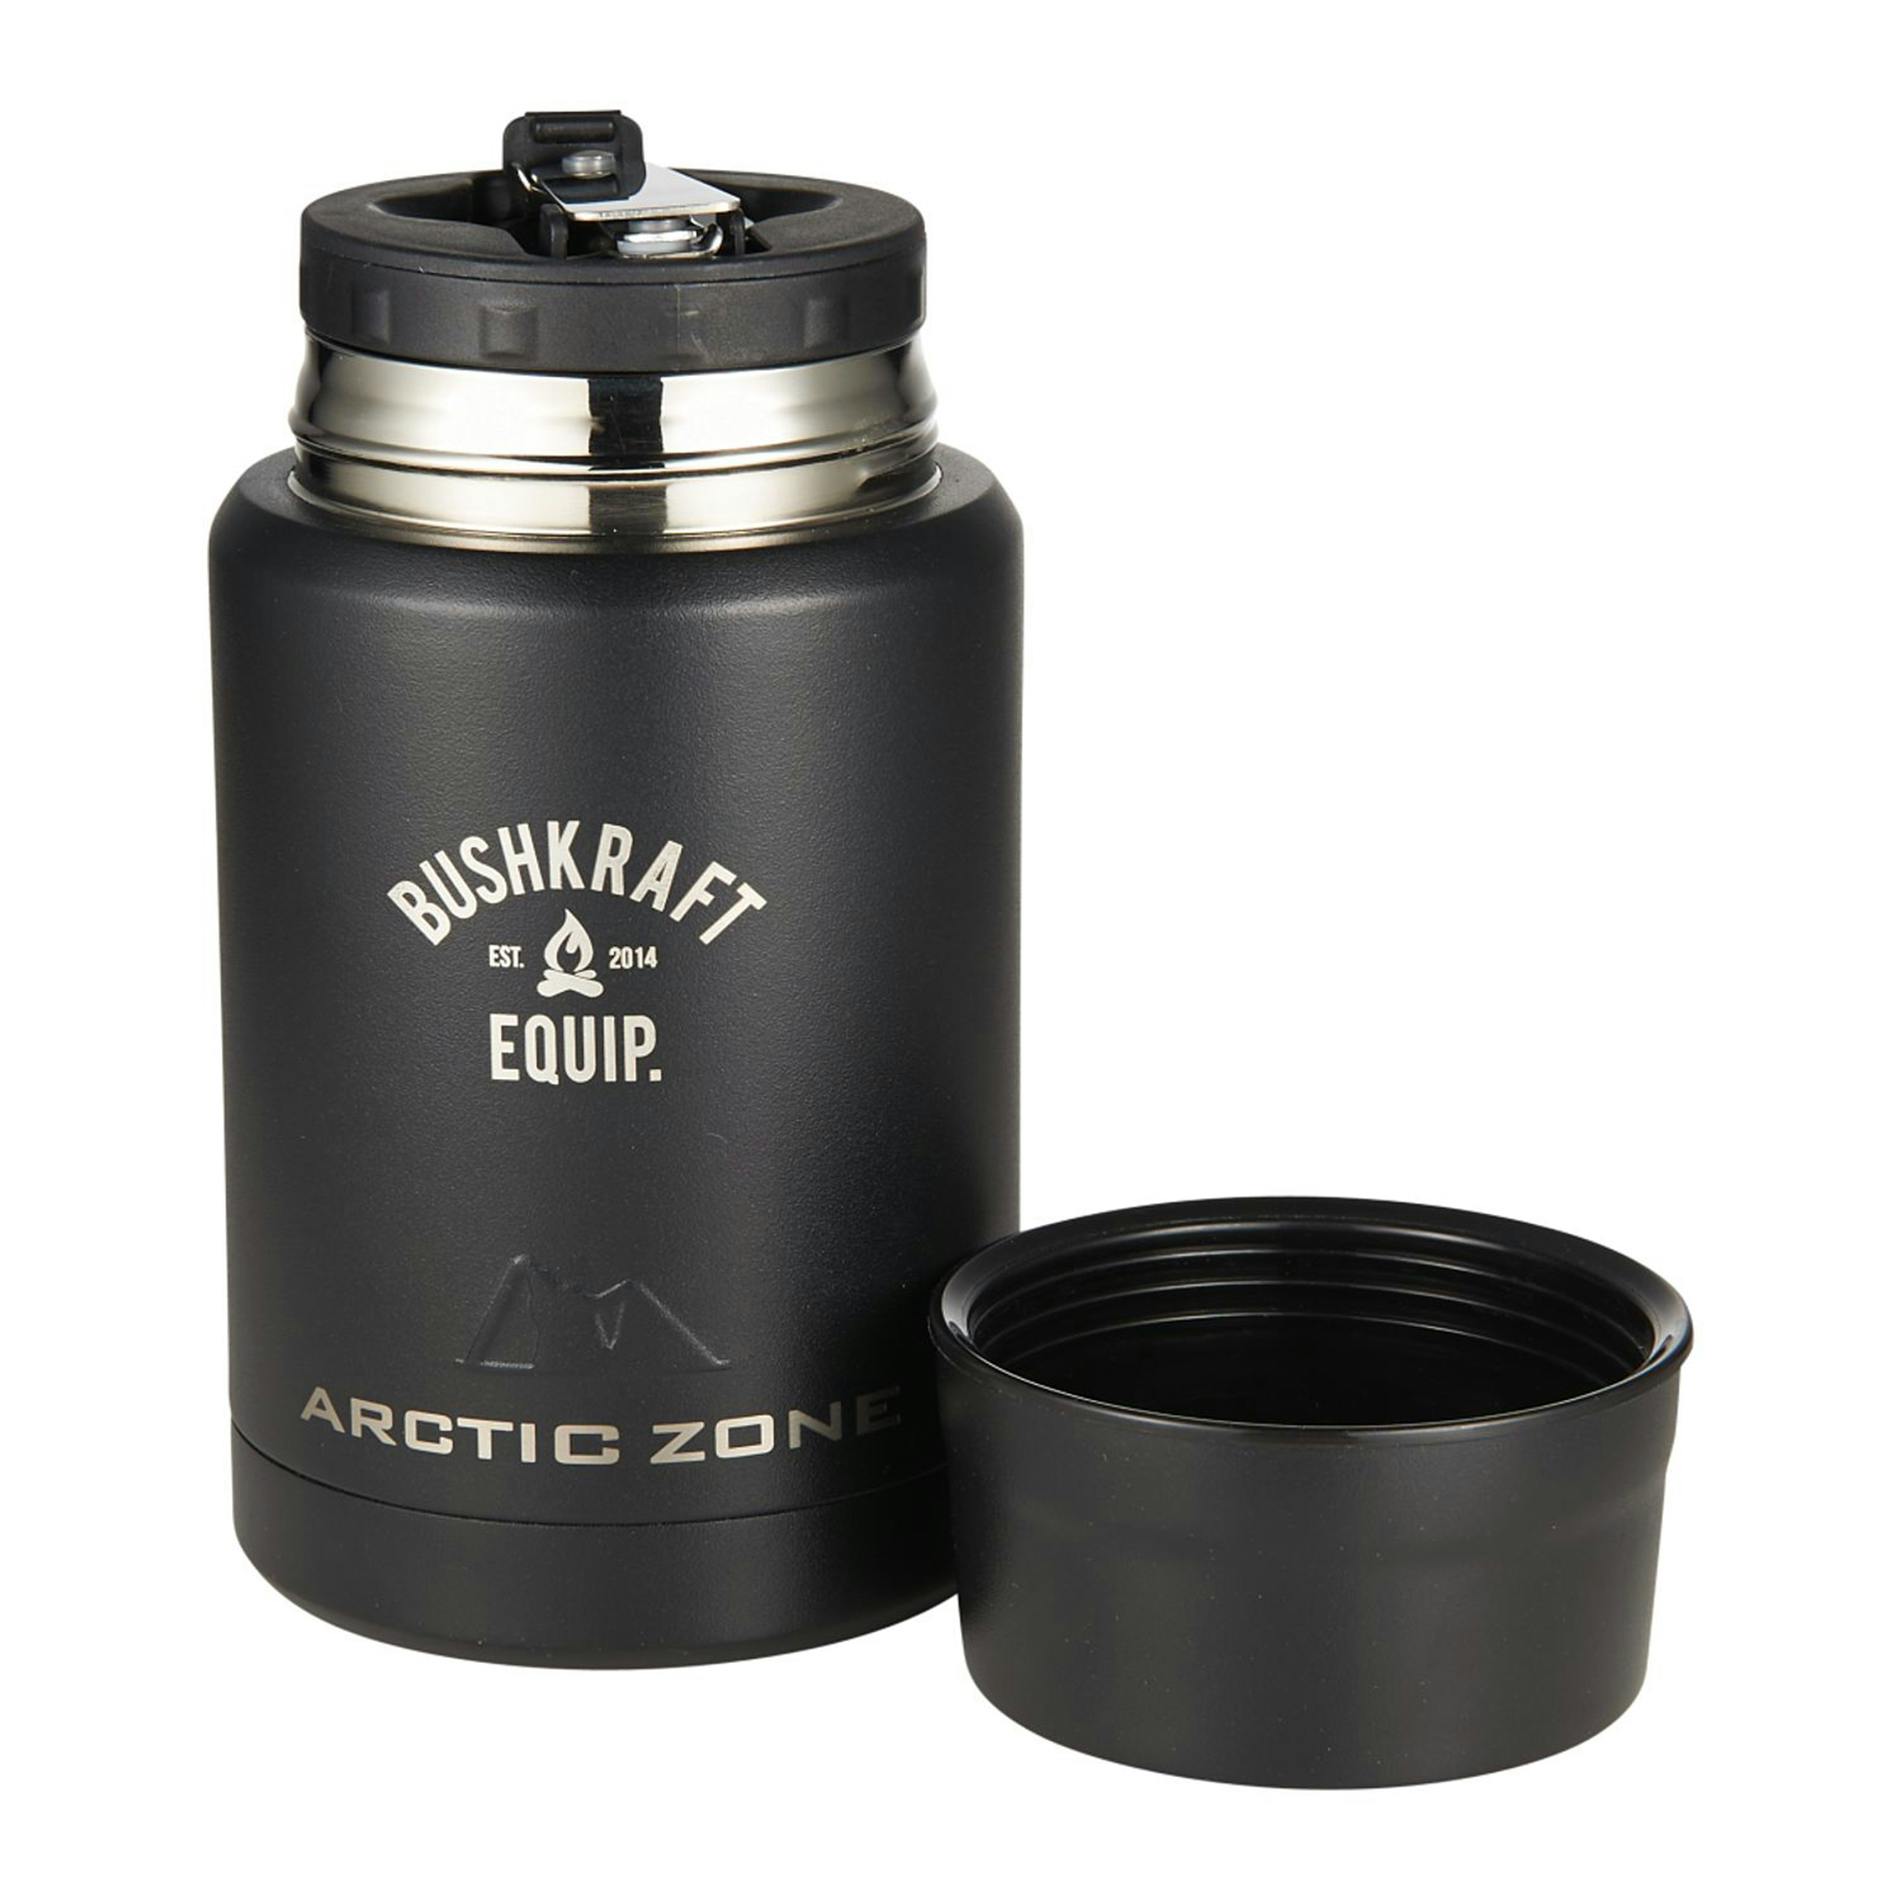 Arctic Zone® Titan Copper Insulated Food Storage - additional Image 4